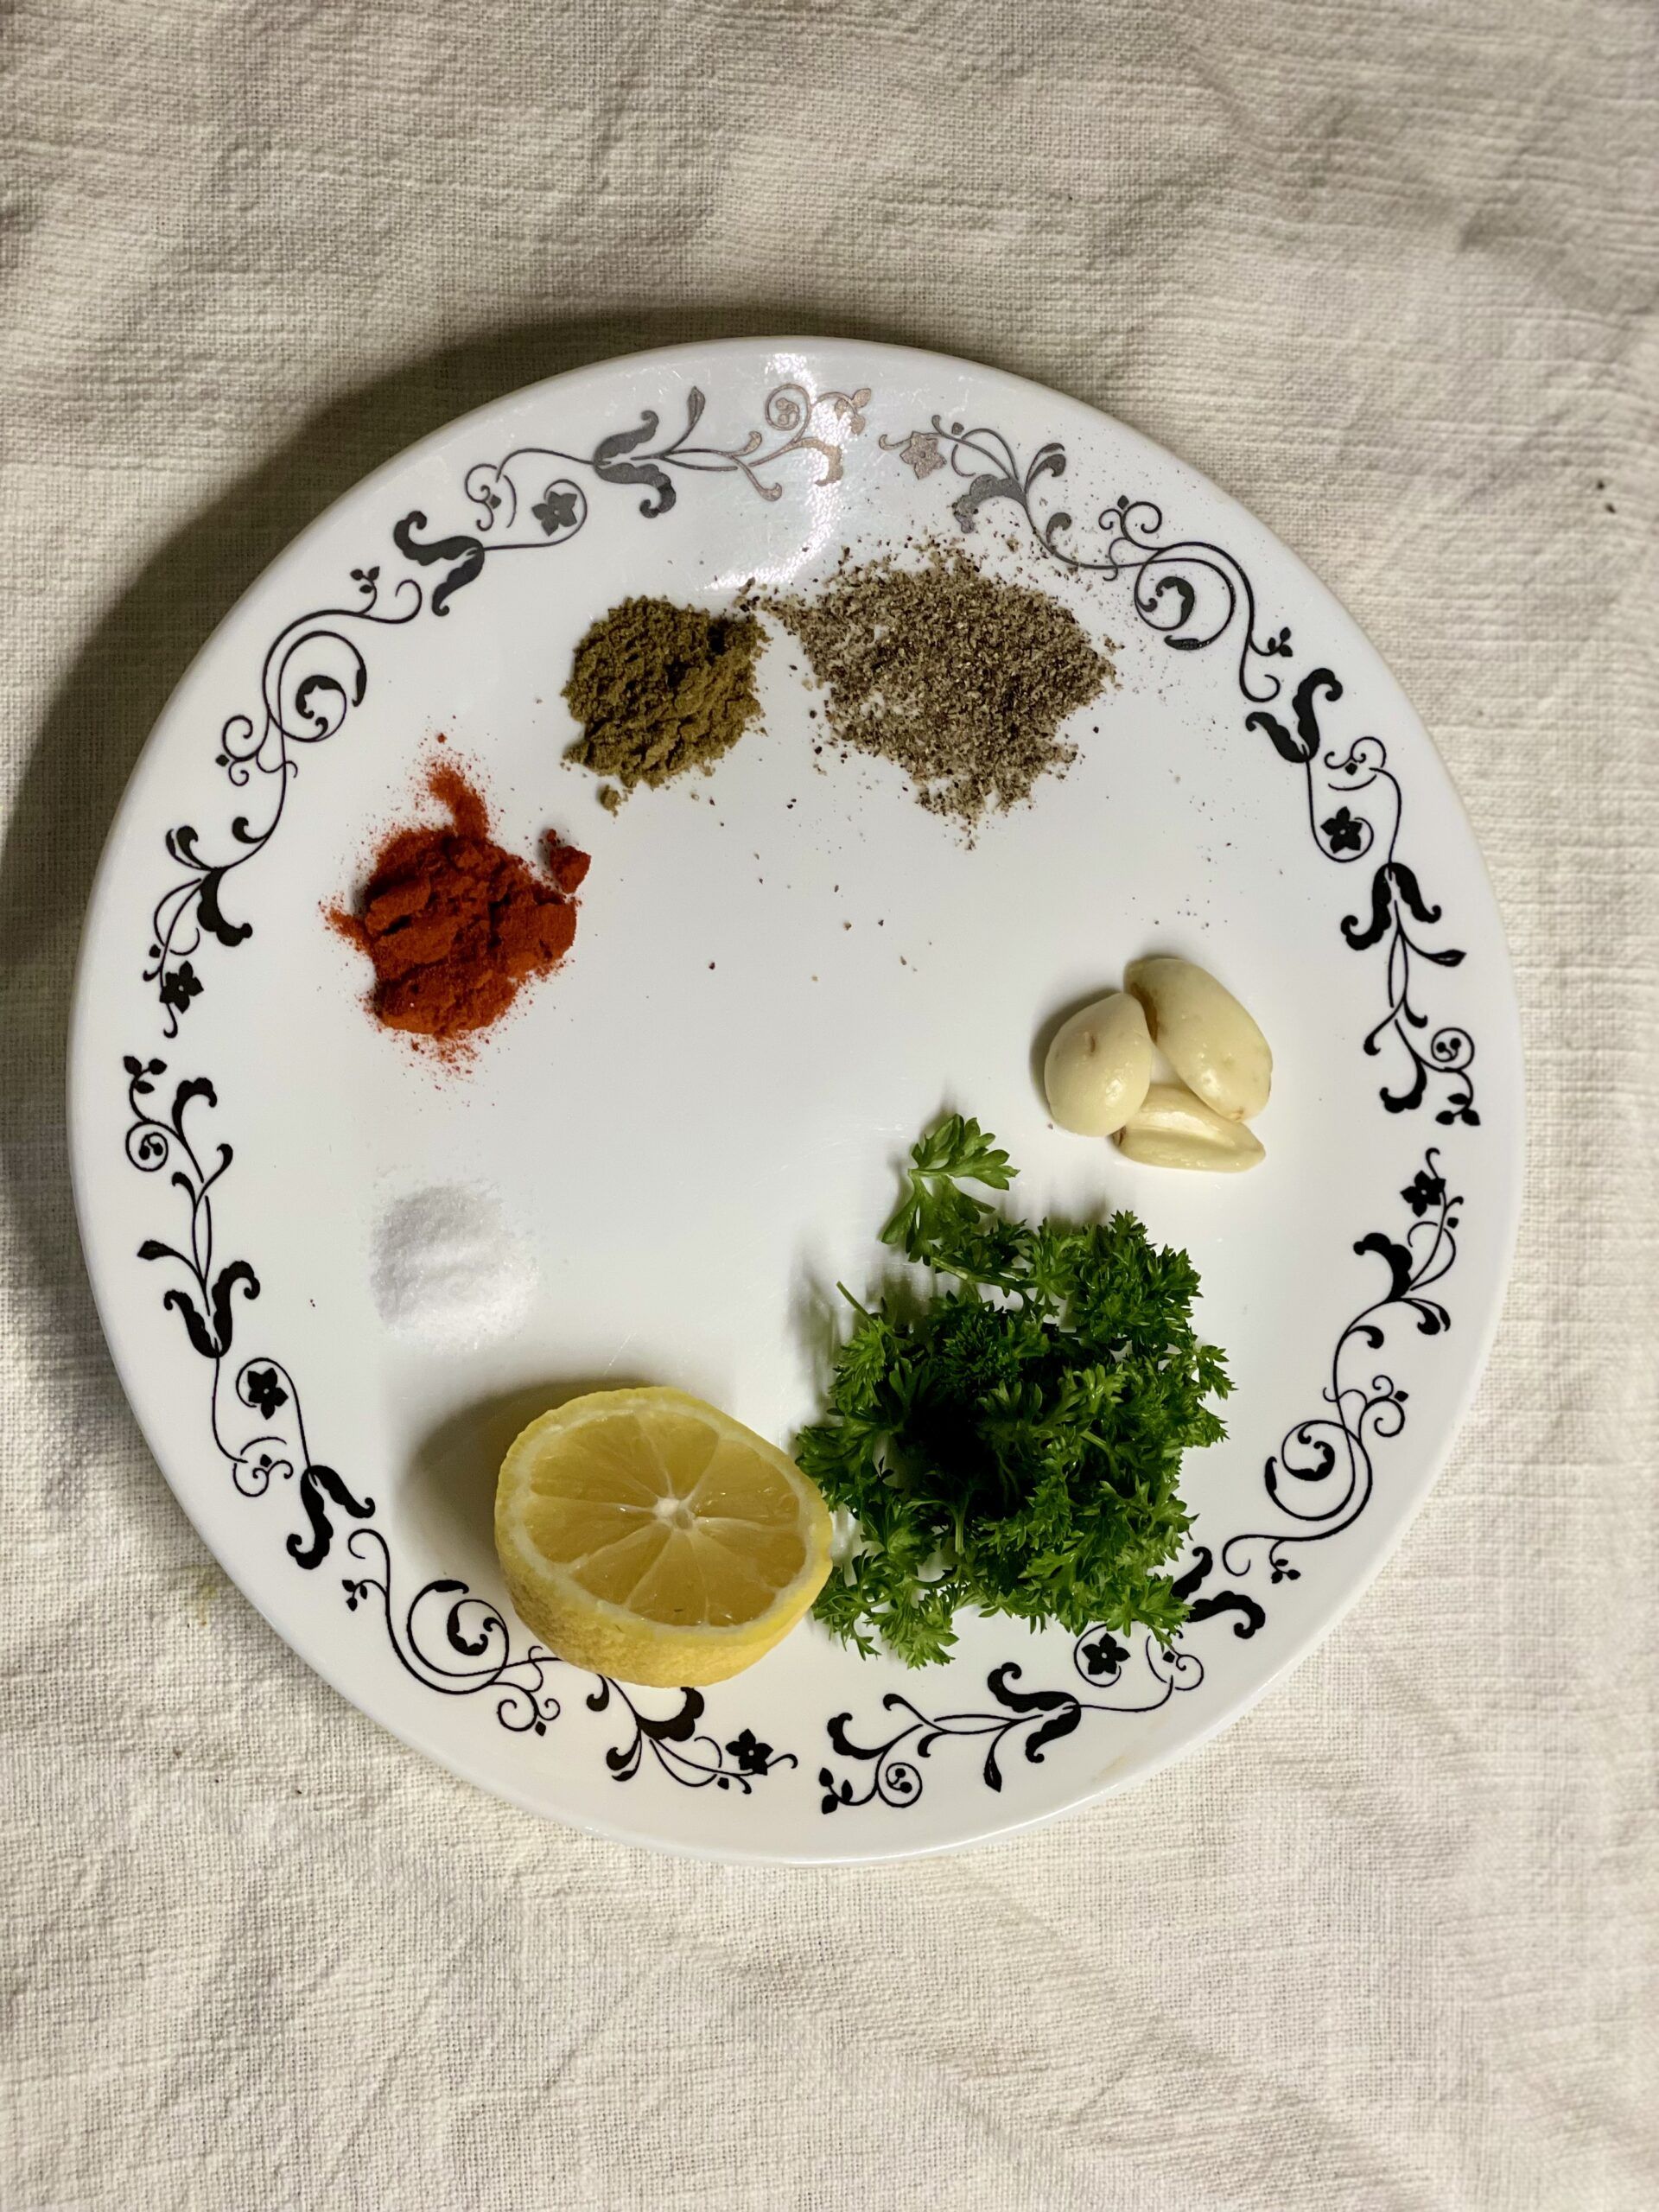 Raw ingredients for hummus